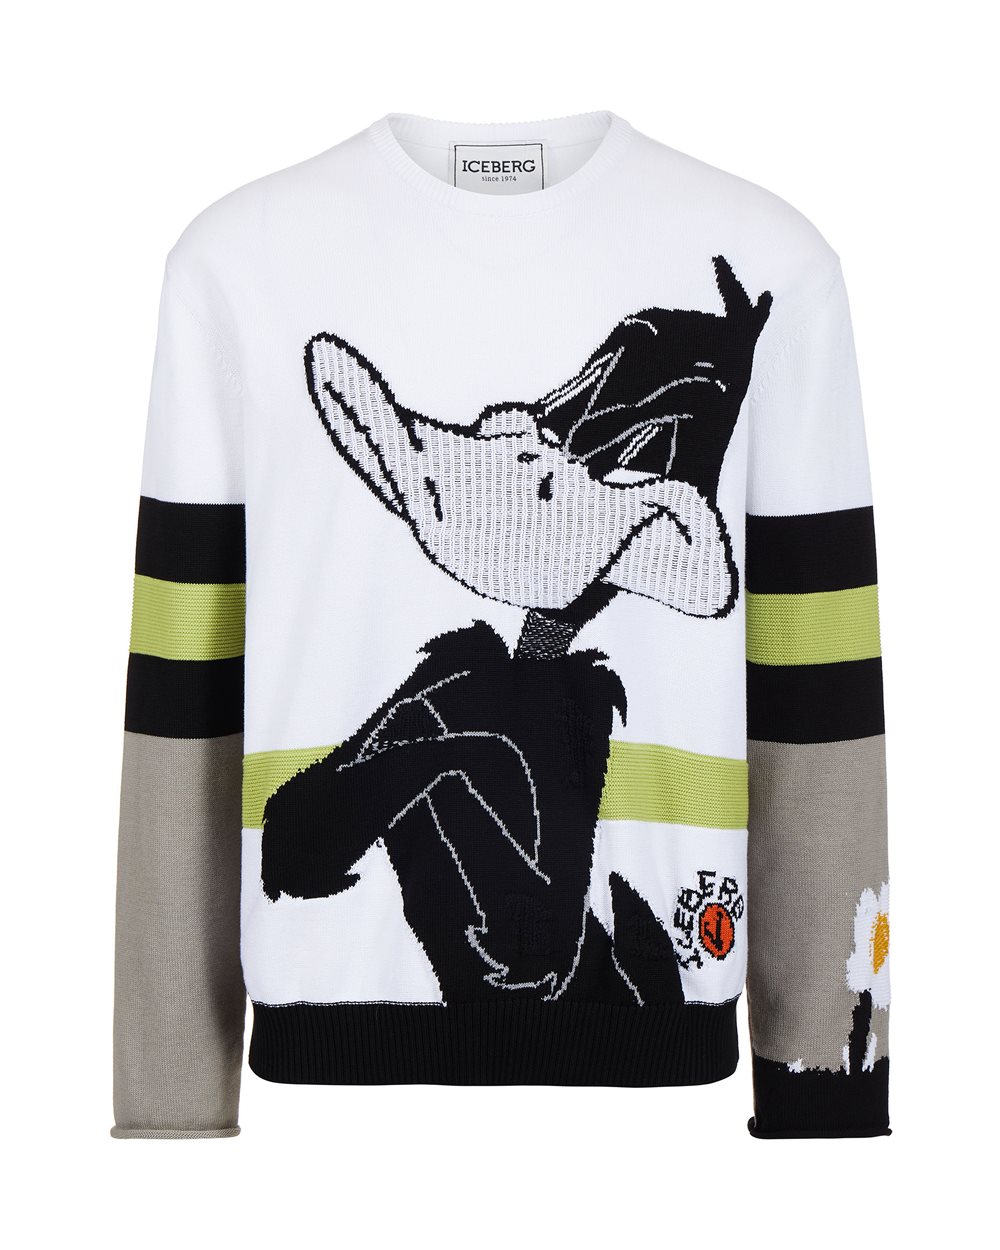 Sweater with cartoon graphics and logo - VAMEE SELECTION | Iceberg - Official Website